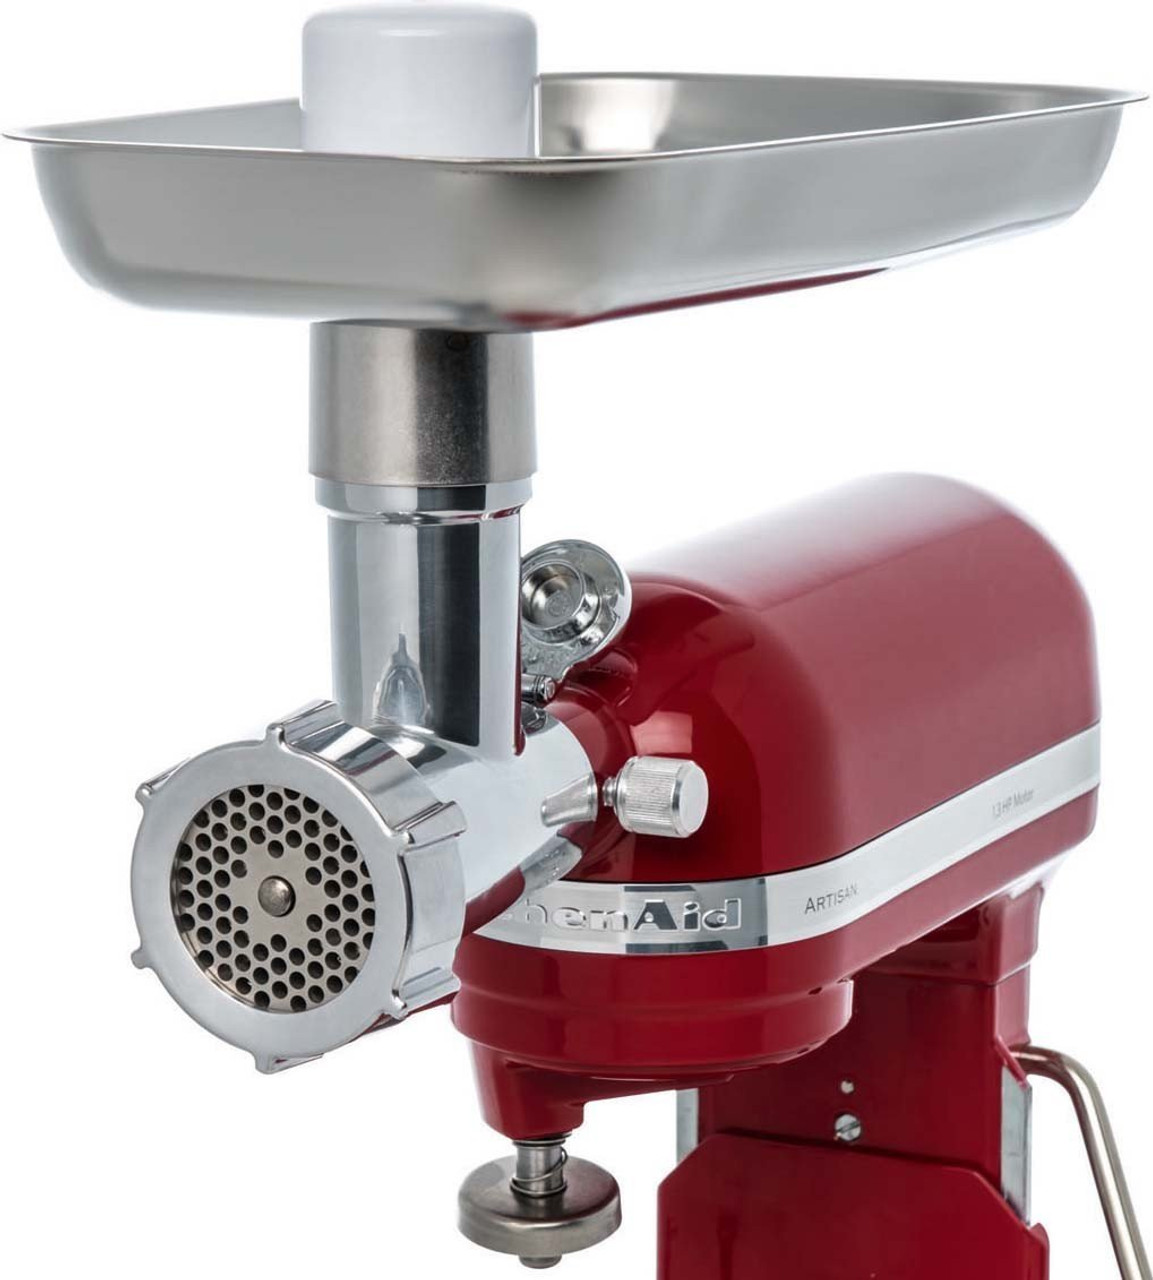 Metal Meat Grinder Attachment for KitchenAid Stand Mixer,Meat